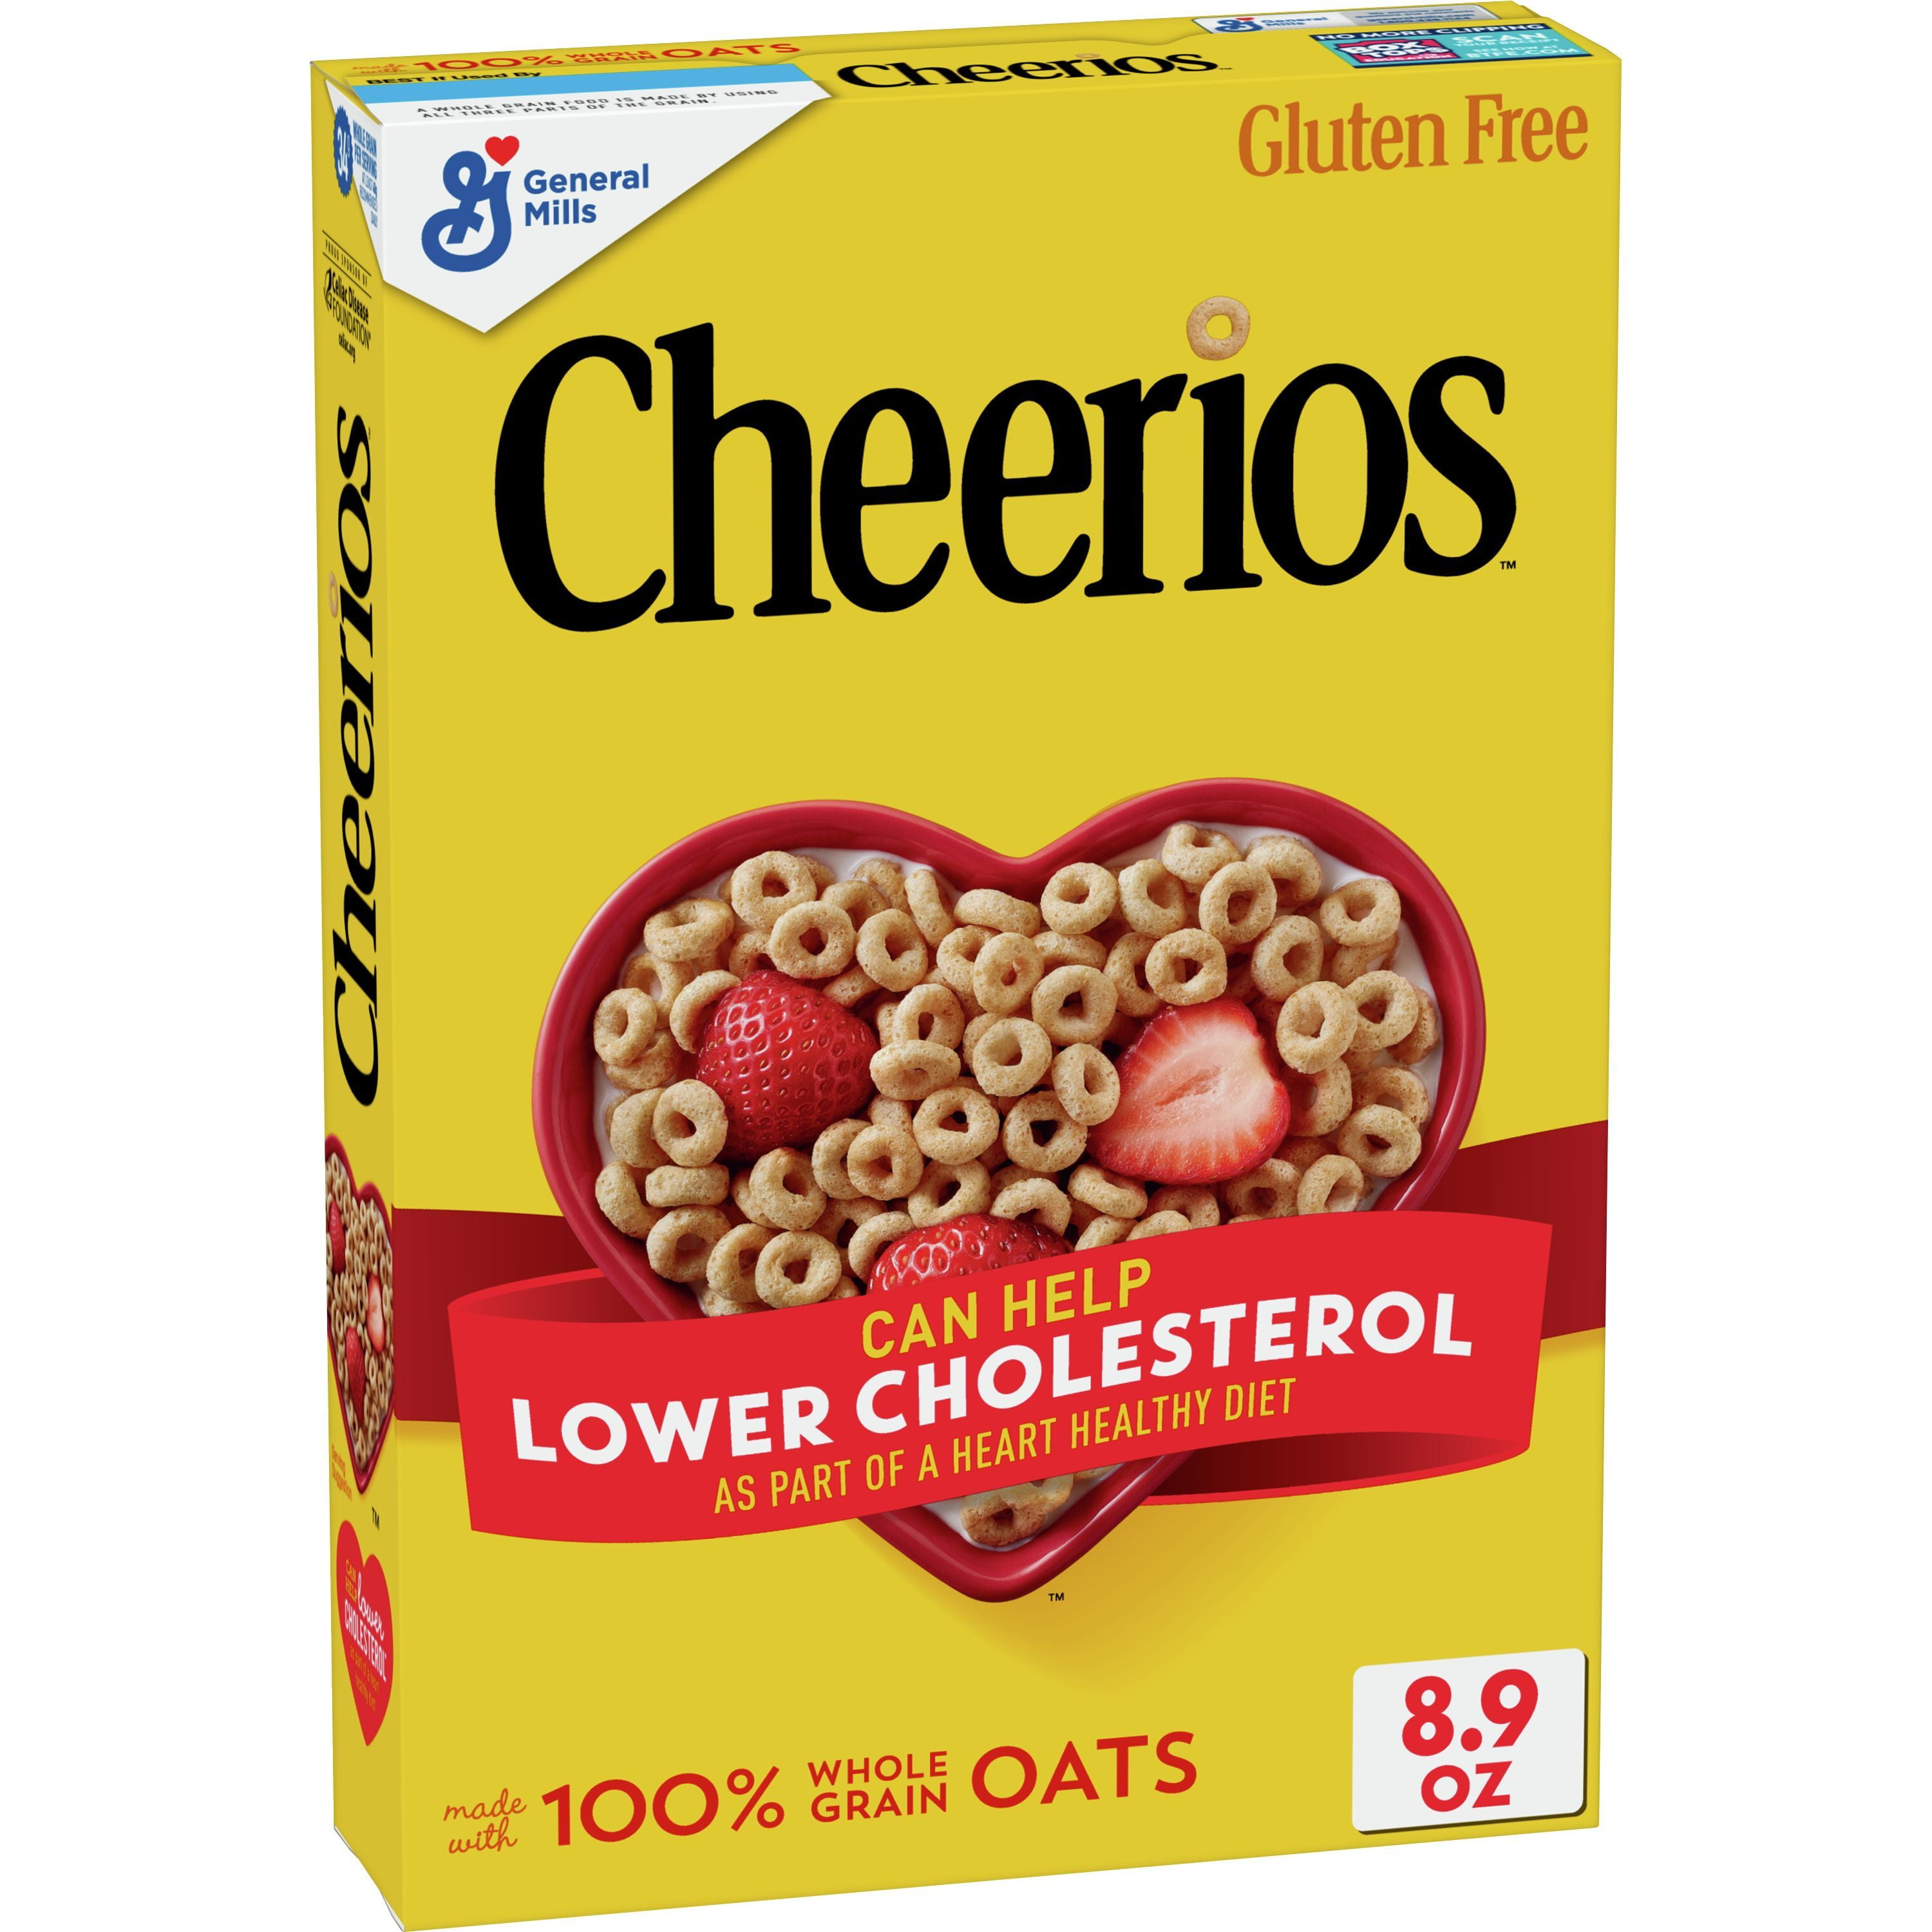 How Many Cheerios Are In A Box Of Cheerios